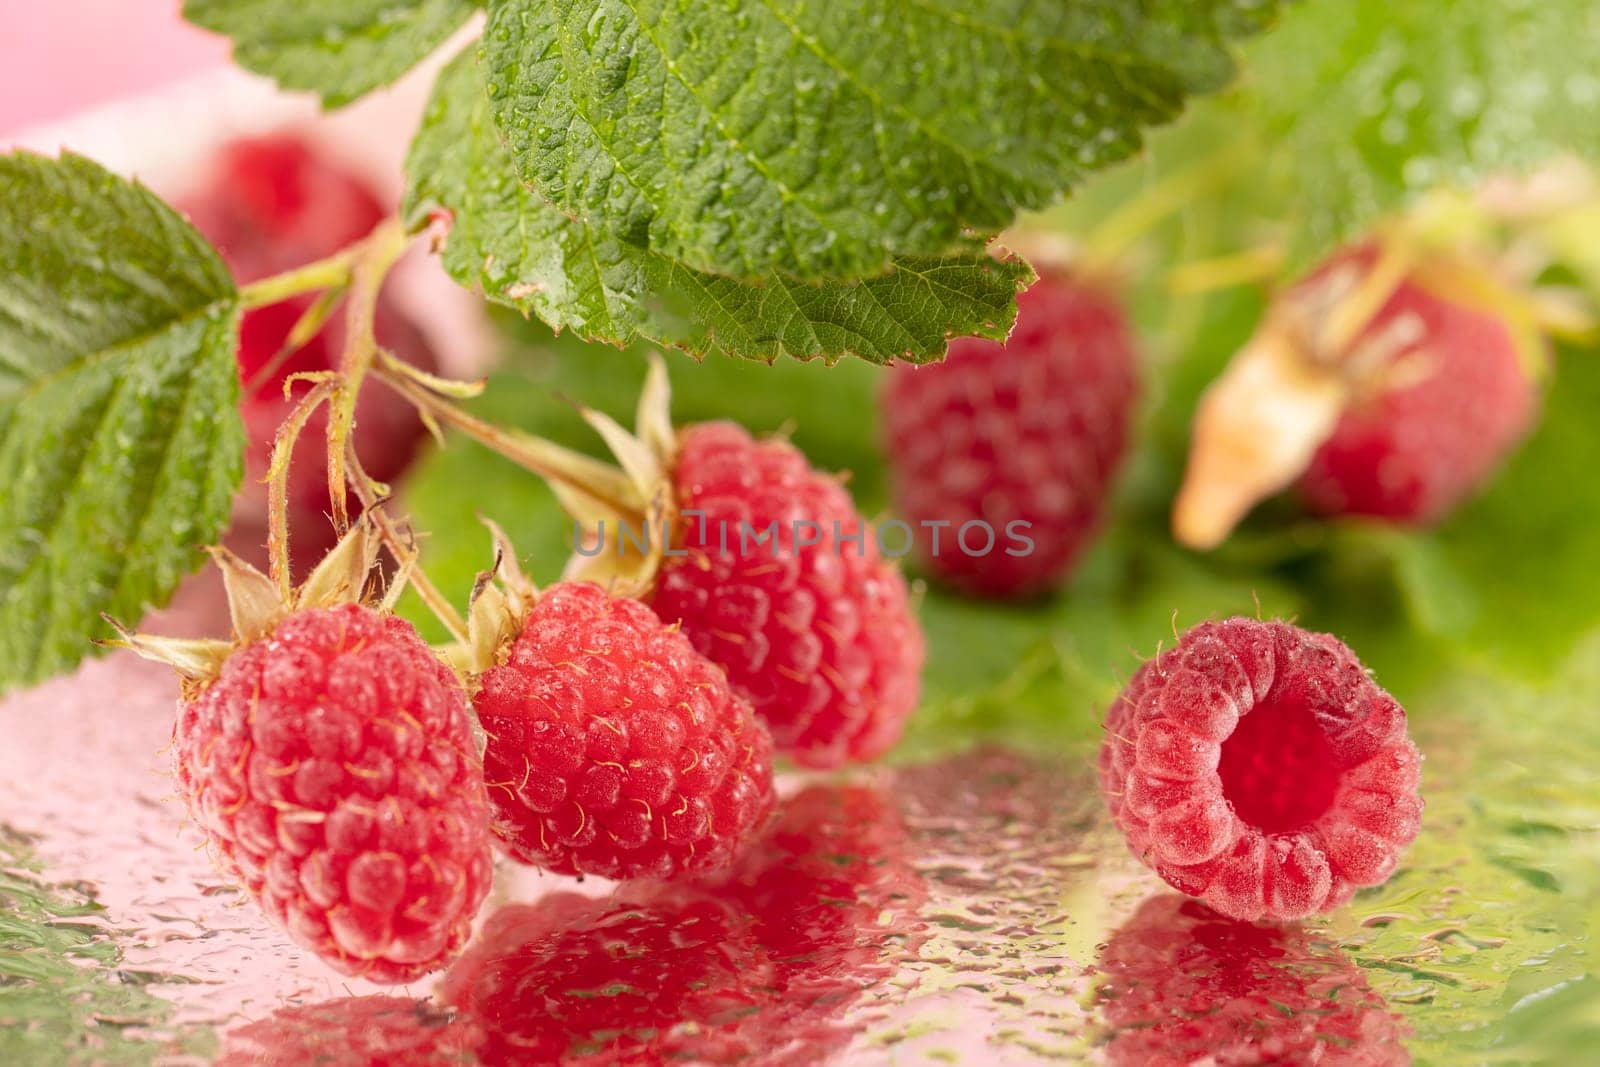 Raspberries with green leaves lie against a golden background. by Sviatlana